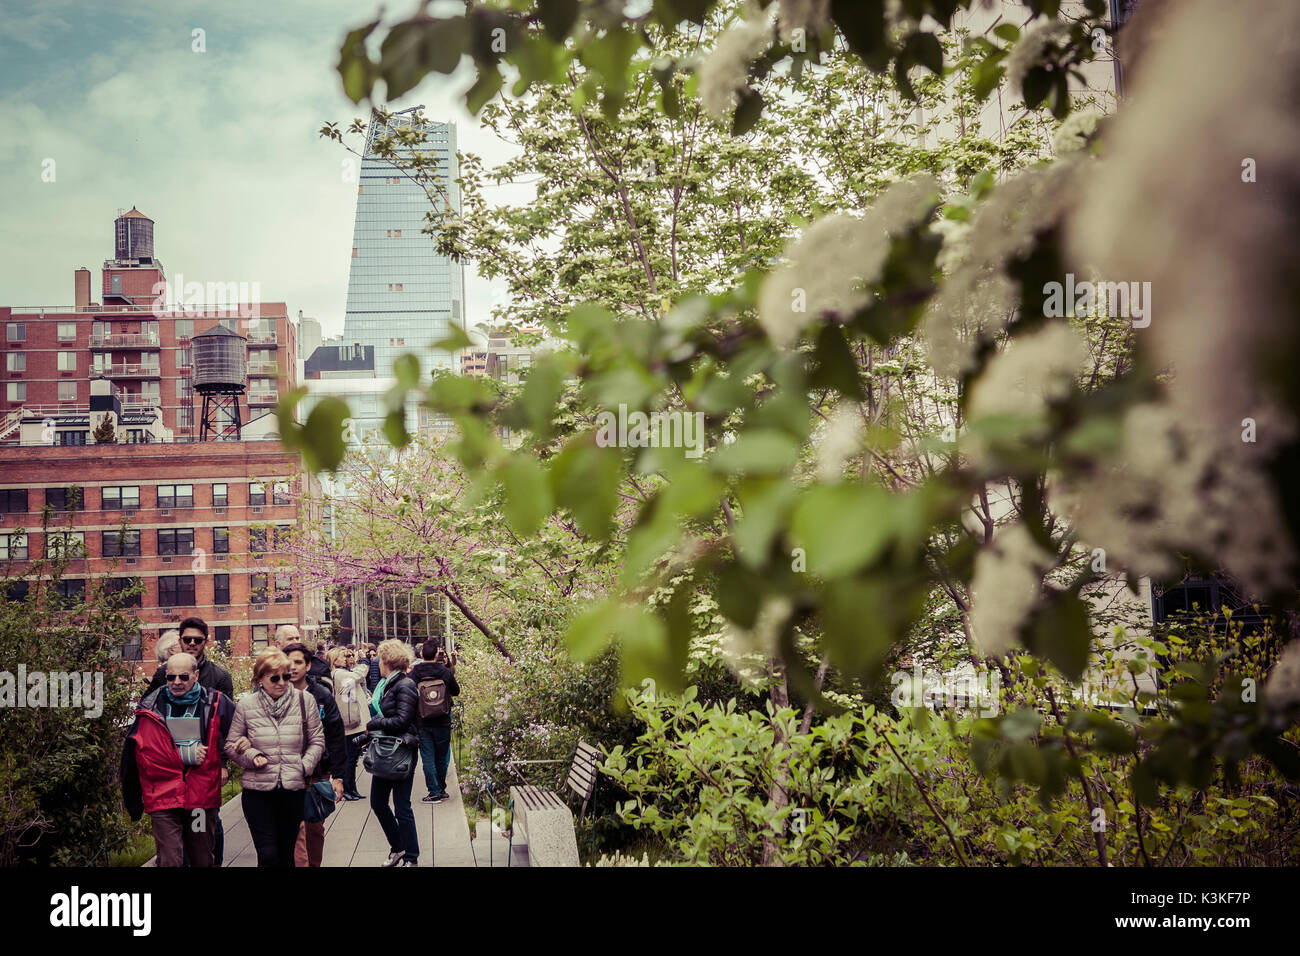 The High Line is a public park built on a historic freight rail line elevated above the streets on Manhattan's West Side. Chelsea, Art District, Tourist Attraction and Life Line of New York, Manhatten, USA Stock Photo